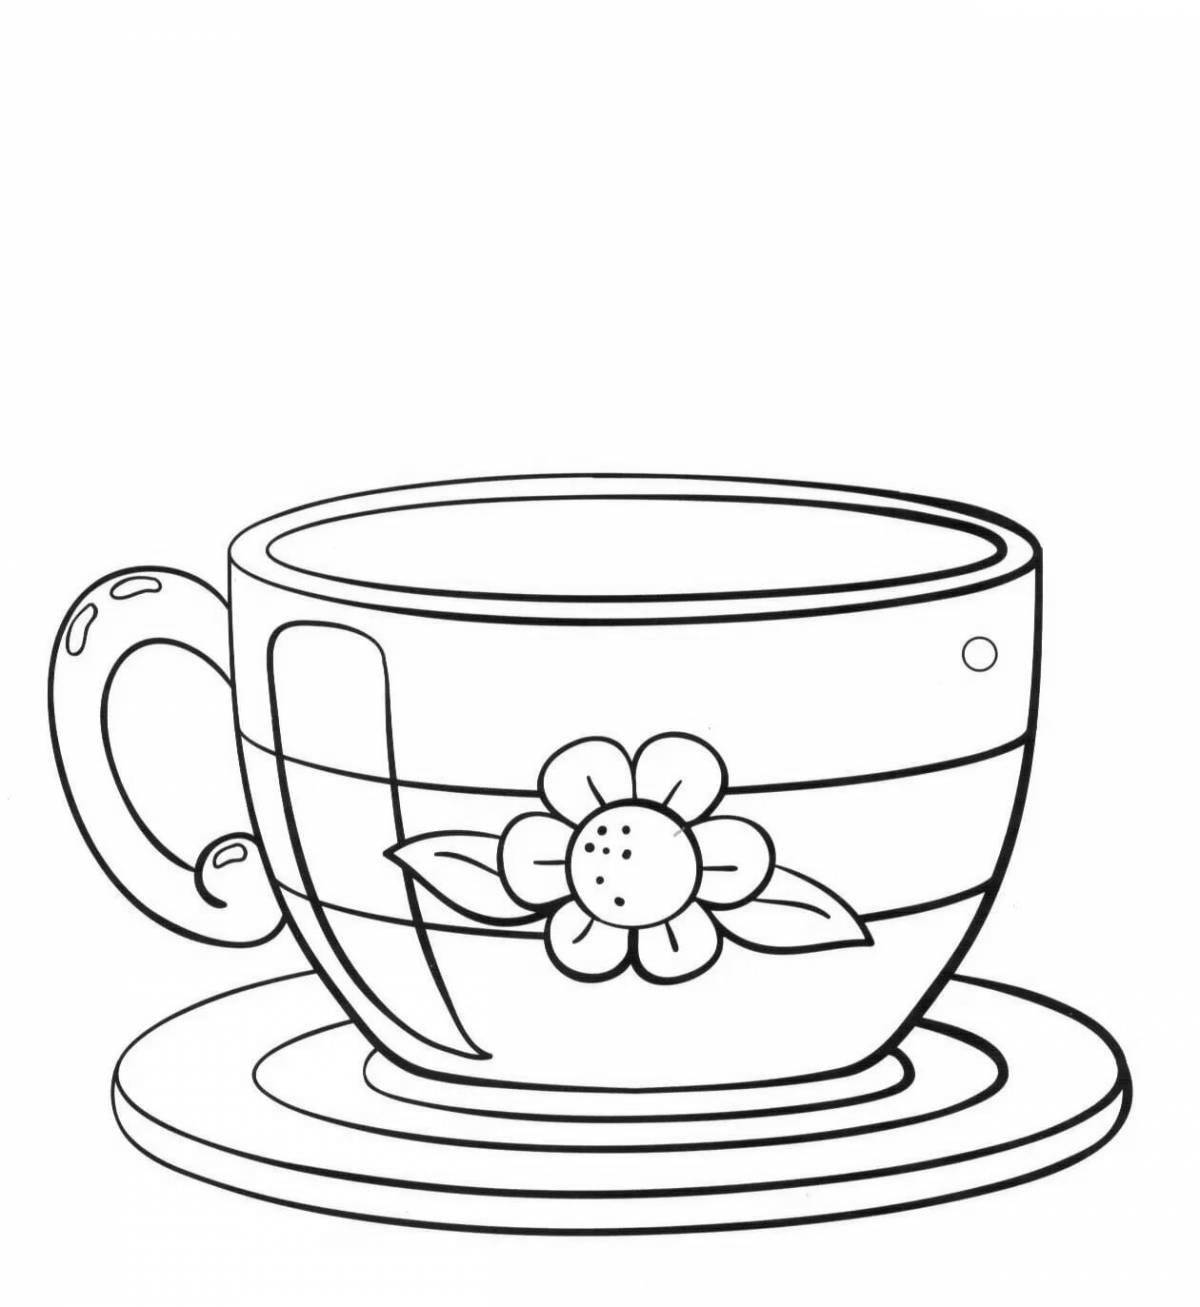 Cup picture for kids #1